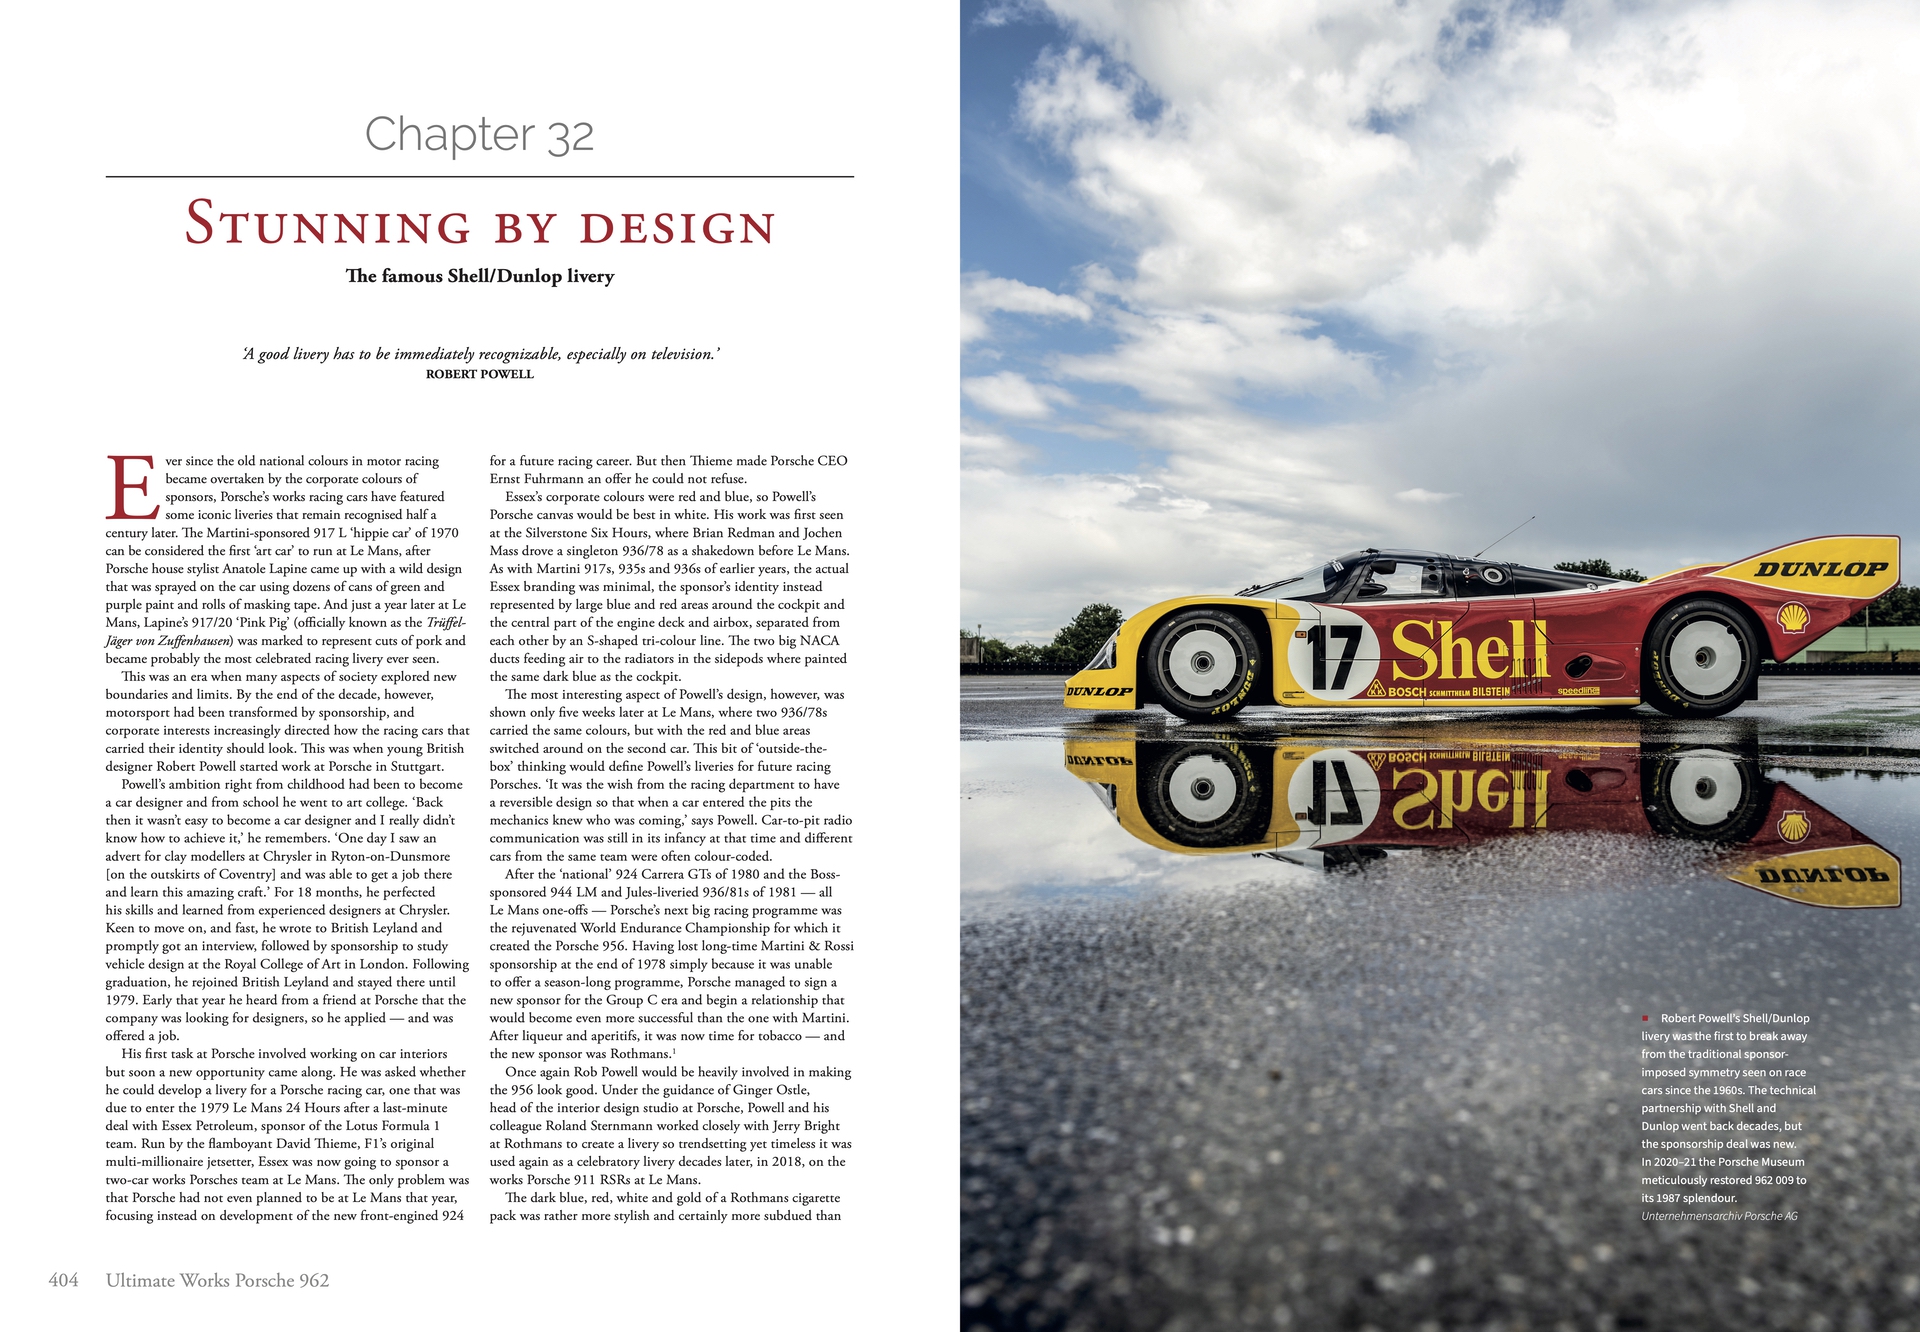 Page from Ultimate Works Porsche 962 - The Definitive History featuring start of chapter 32